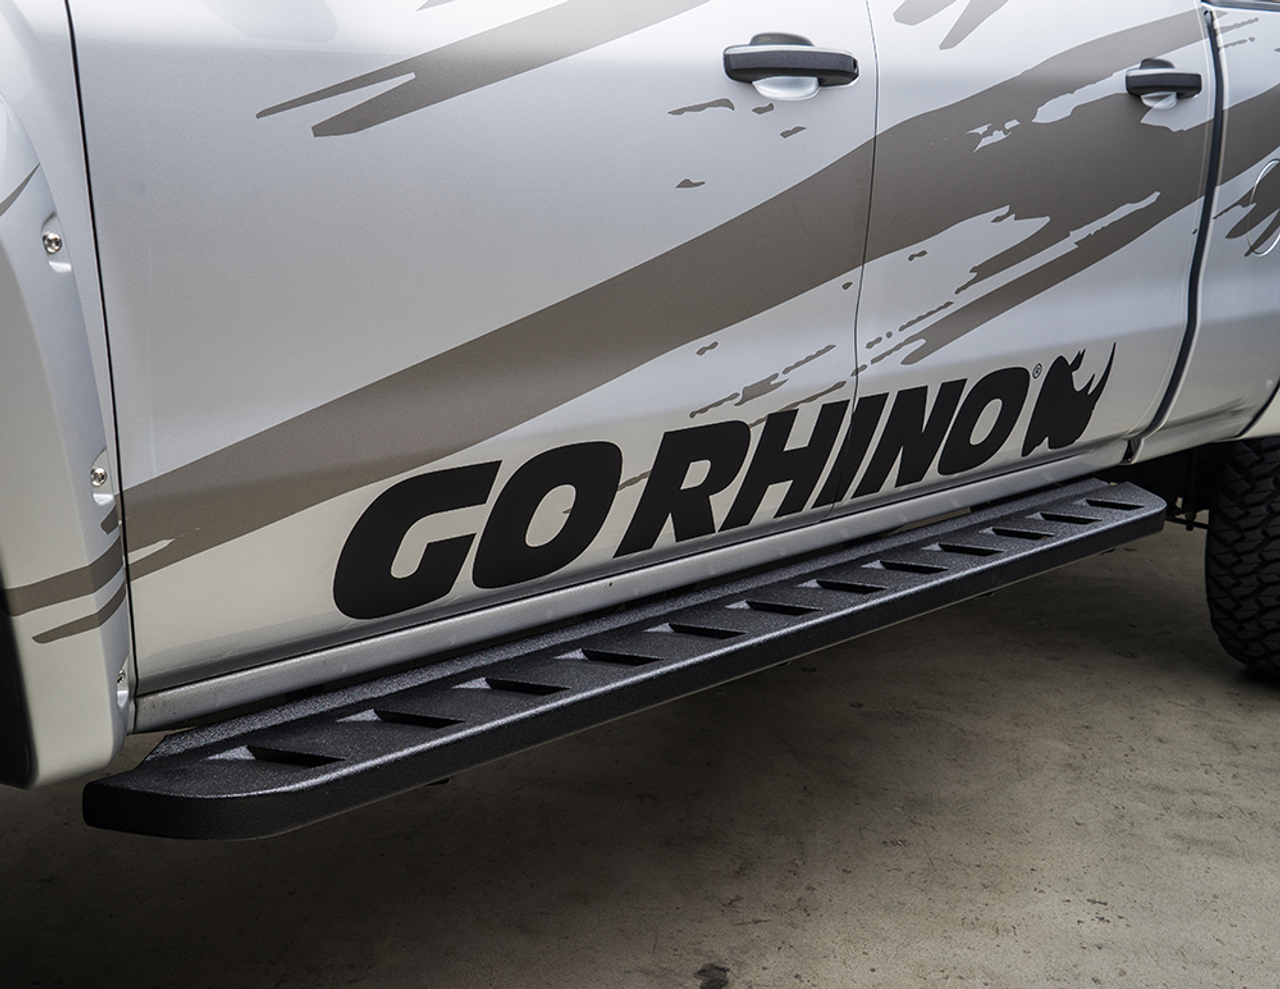 Go Rhino 634417348PC Ford, F-250, F-350, 2017 - 2021, RB10 Running boards - Complete Kit: RB10 Running boards + Brackets, Galvanized Steel, Textured black, 630048PC RB10 + 6941555 RB Brackets